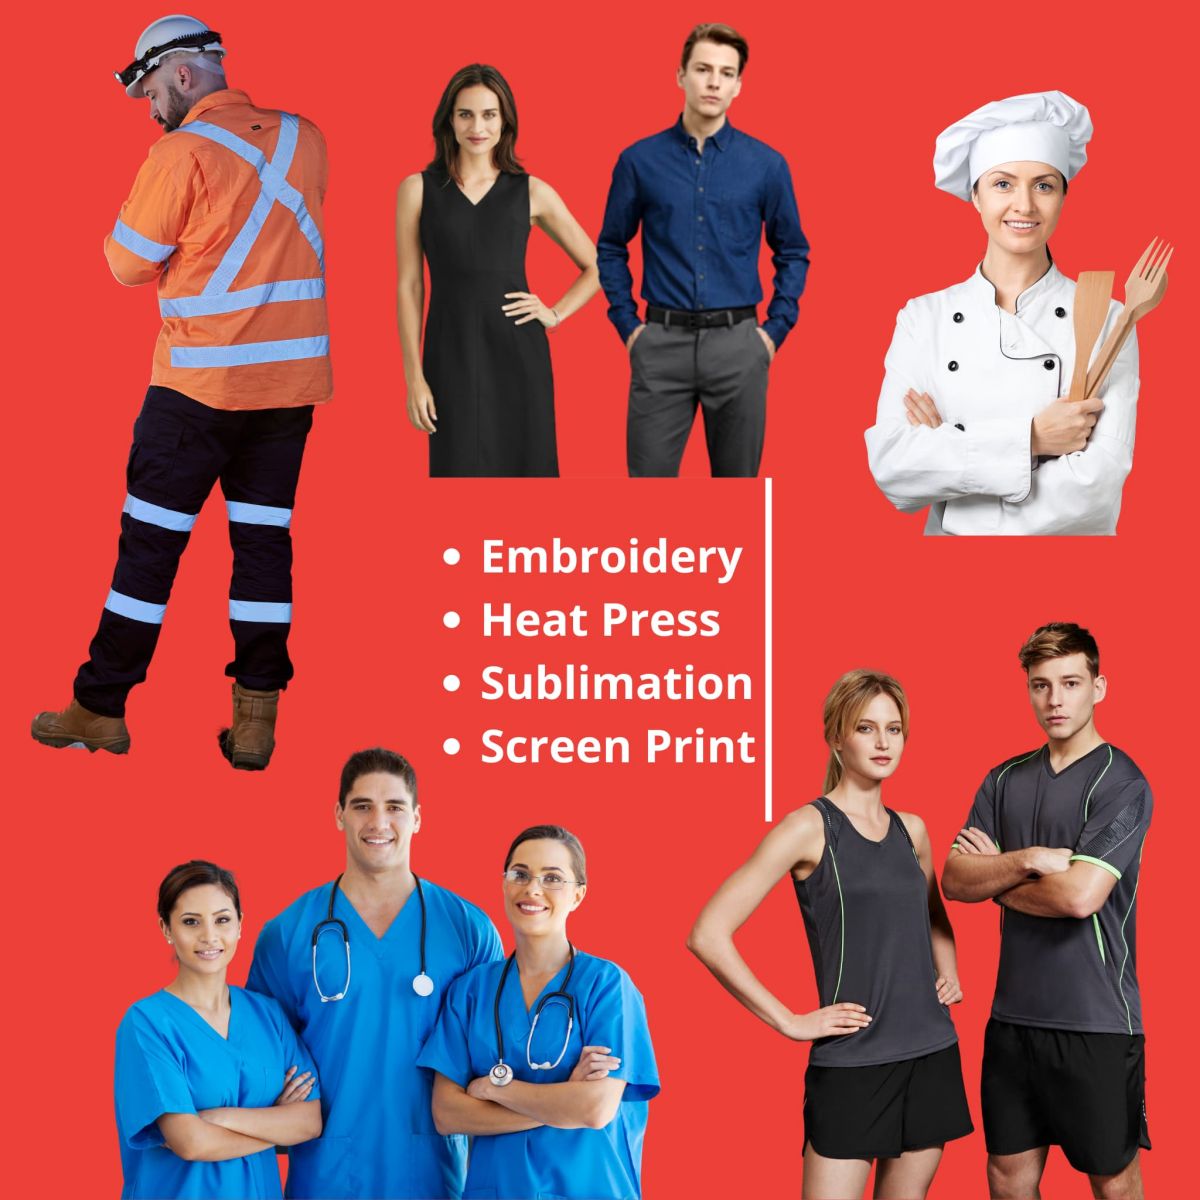 hip pocket services and products